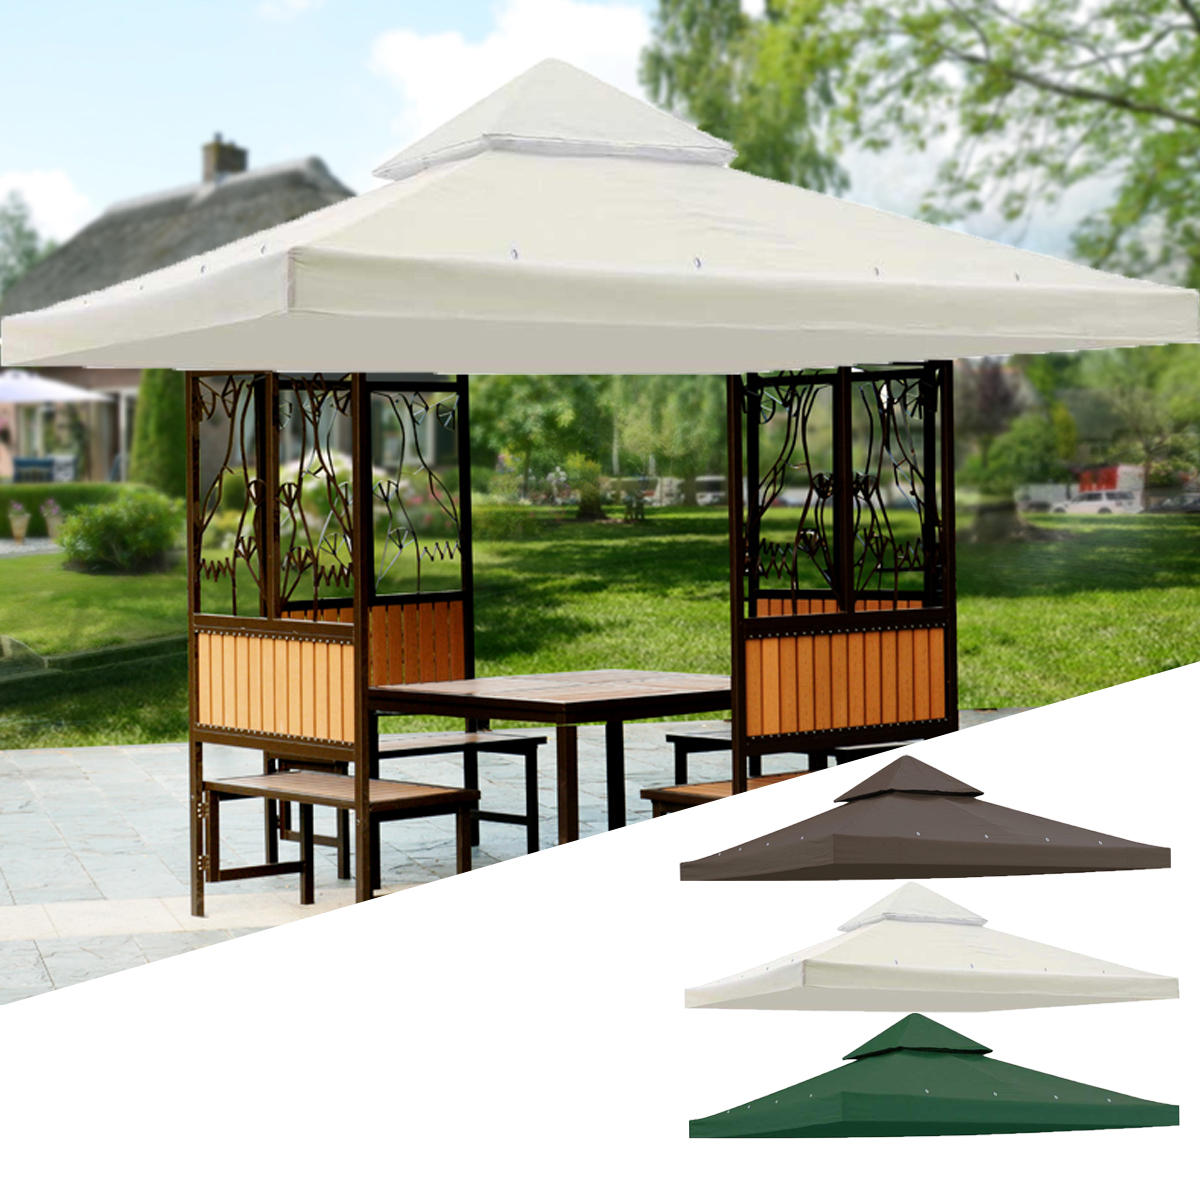 120x120inch Garden Pavilion Terrace Top Canopy Cover Garden Shade Gazebo Patio Tent Sunshade Accessories Replacement